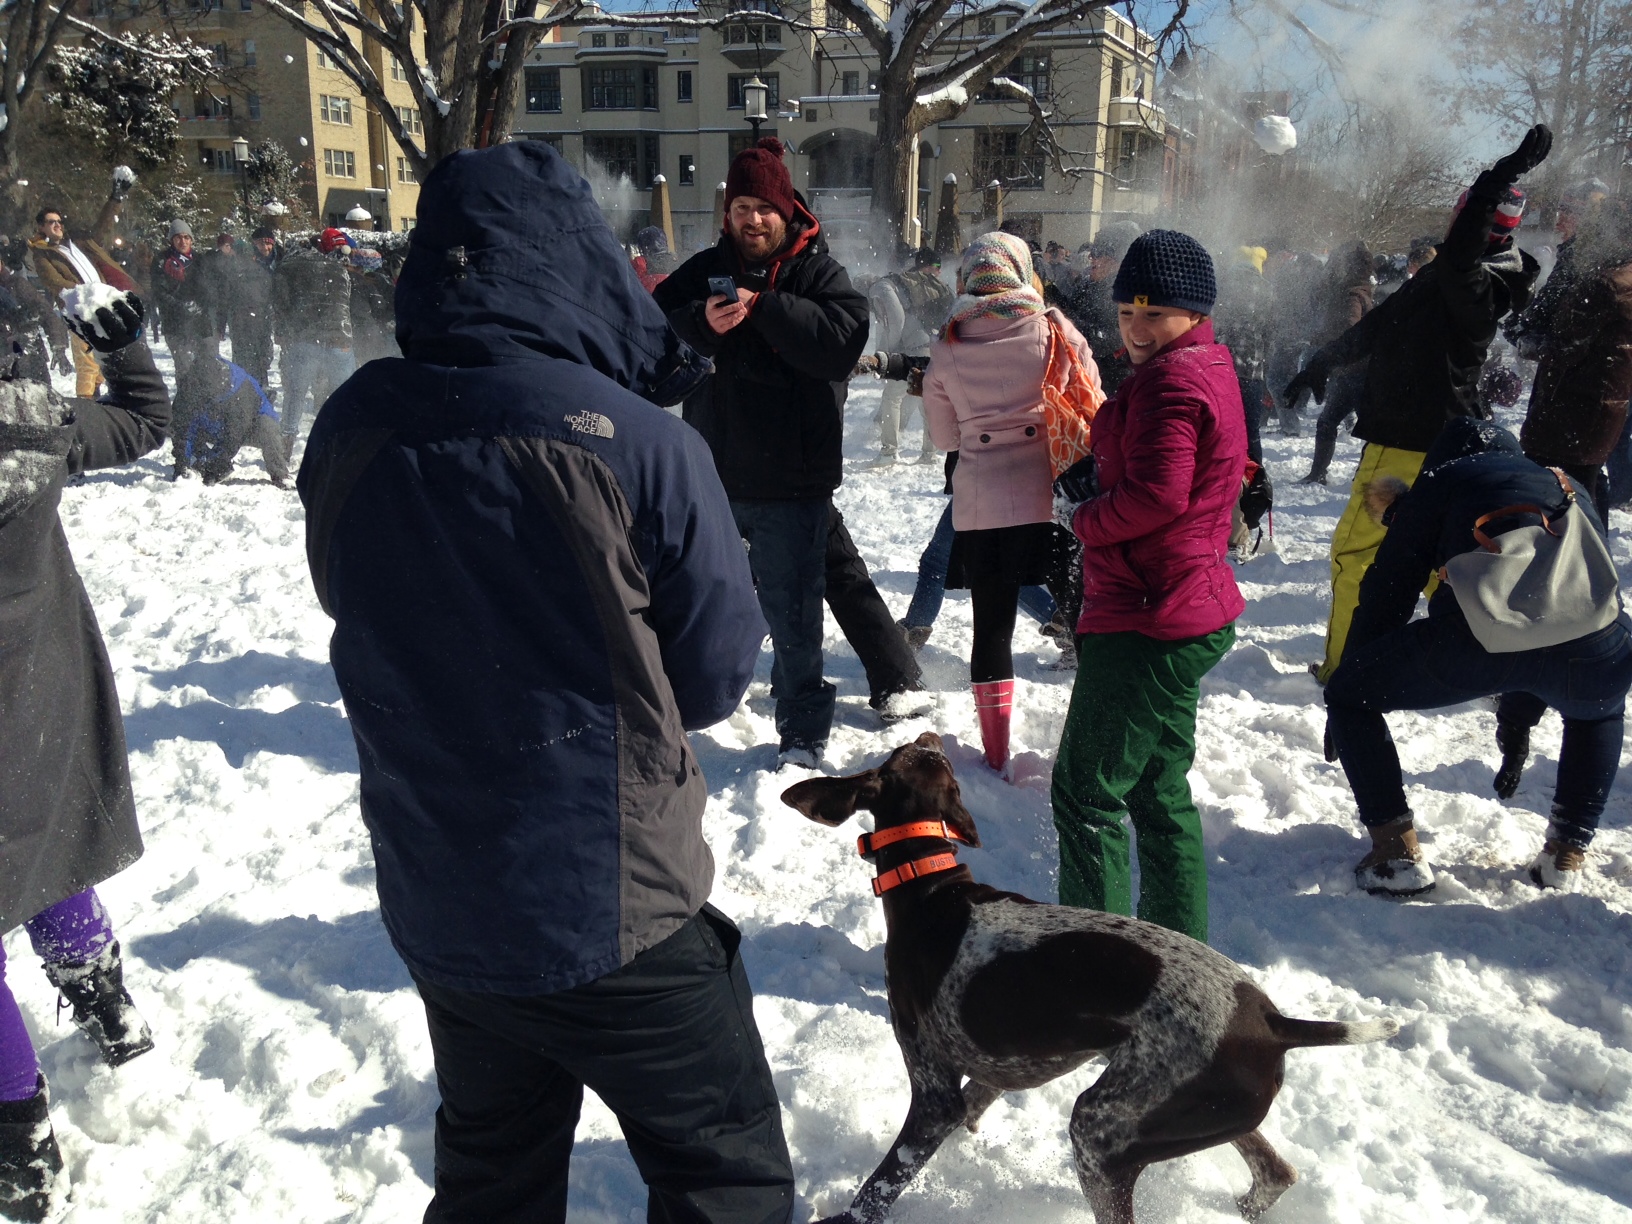 Some snowball fighters brought their dogs to enjoy the snow day activity. (WTOP/Megan Cloherty)